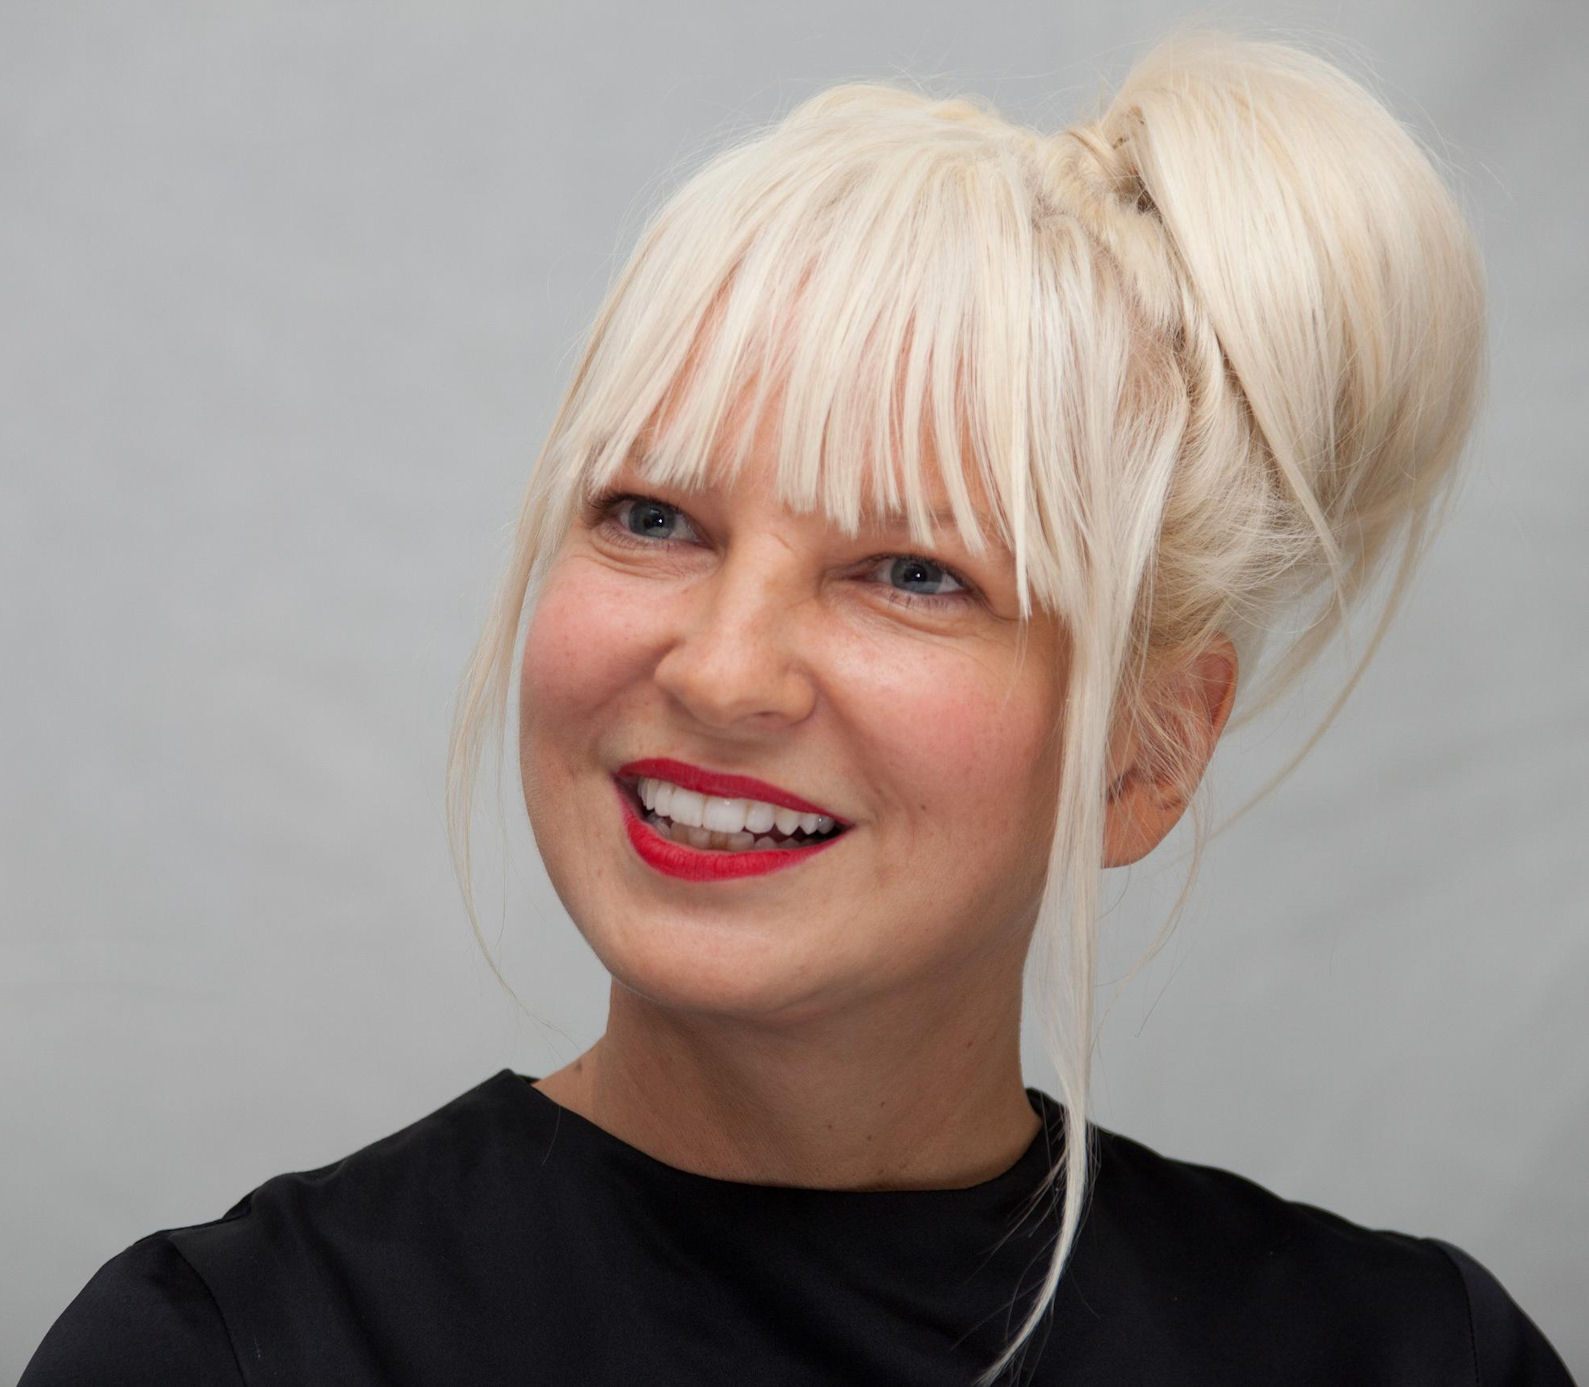 Albums 100+ Images Pictures Of Sia The Singer Updated 09/2023